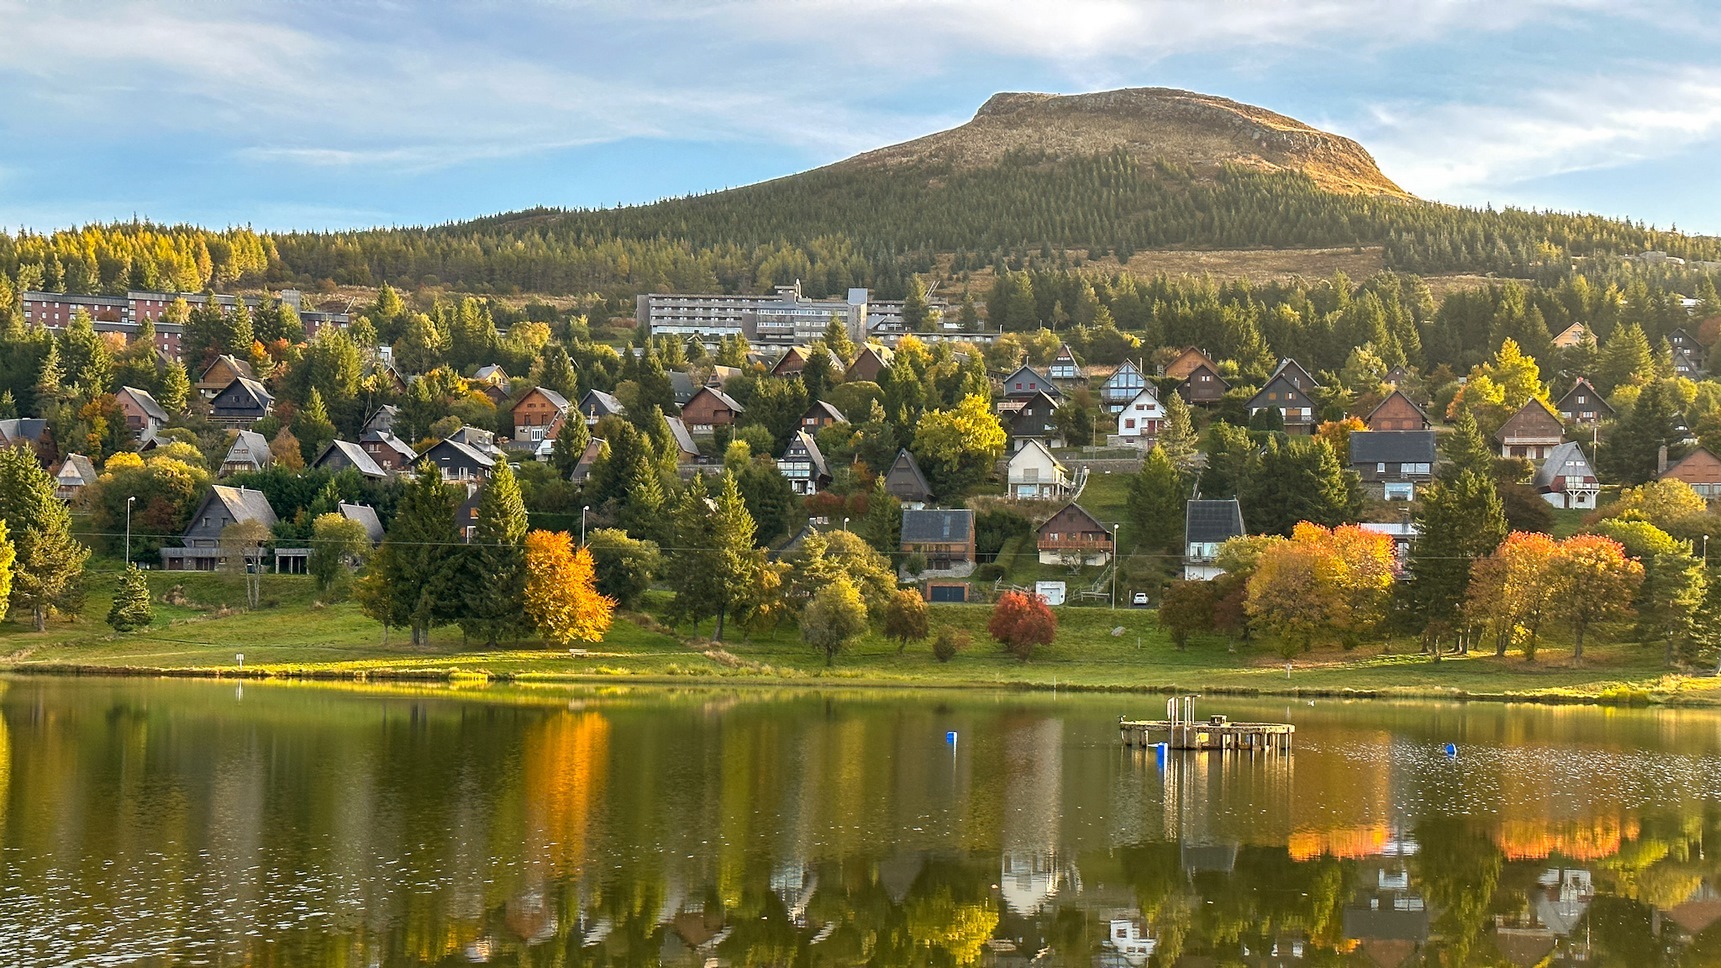 Super Besse, the Village of chalets in Super Besse under the autumn colors